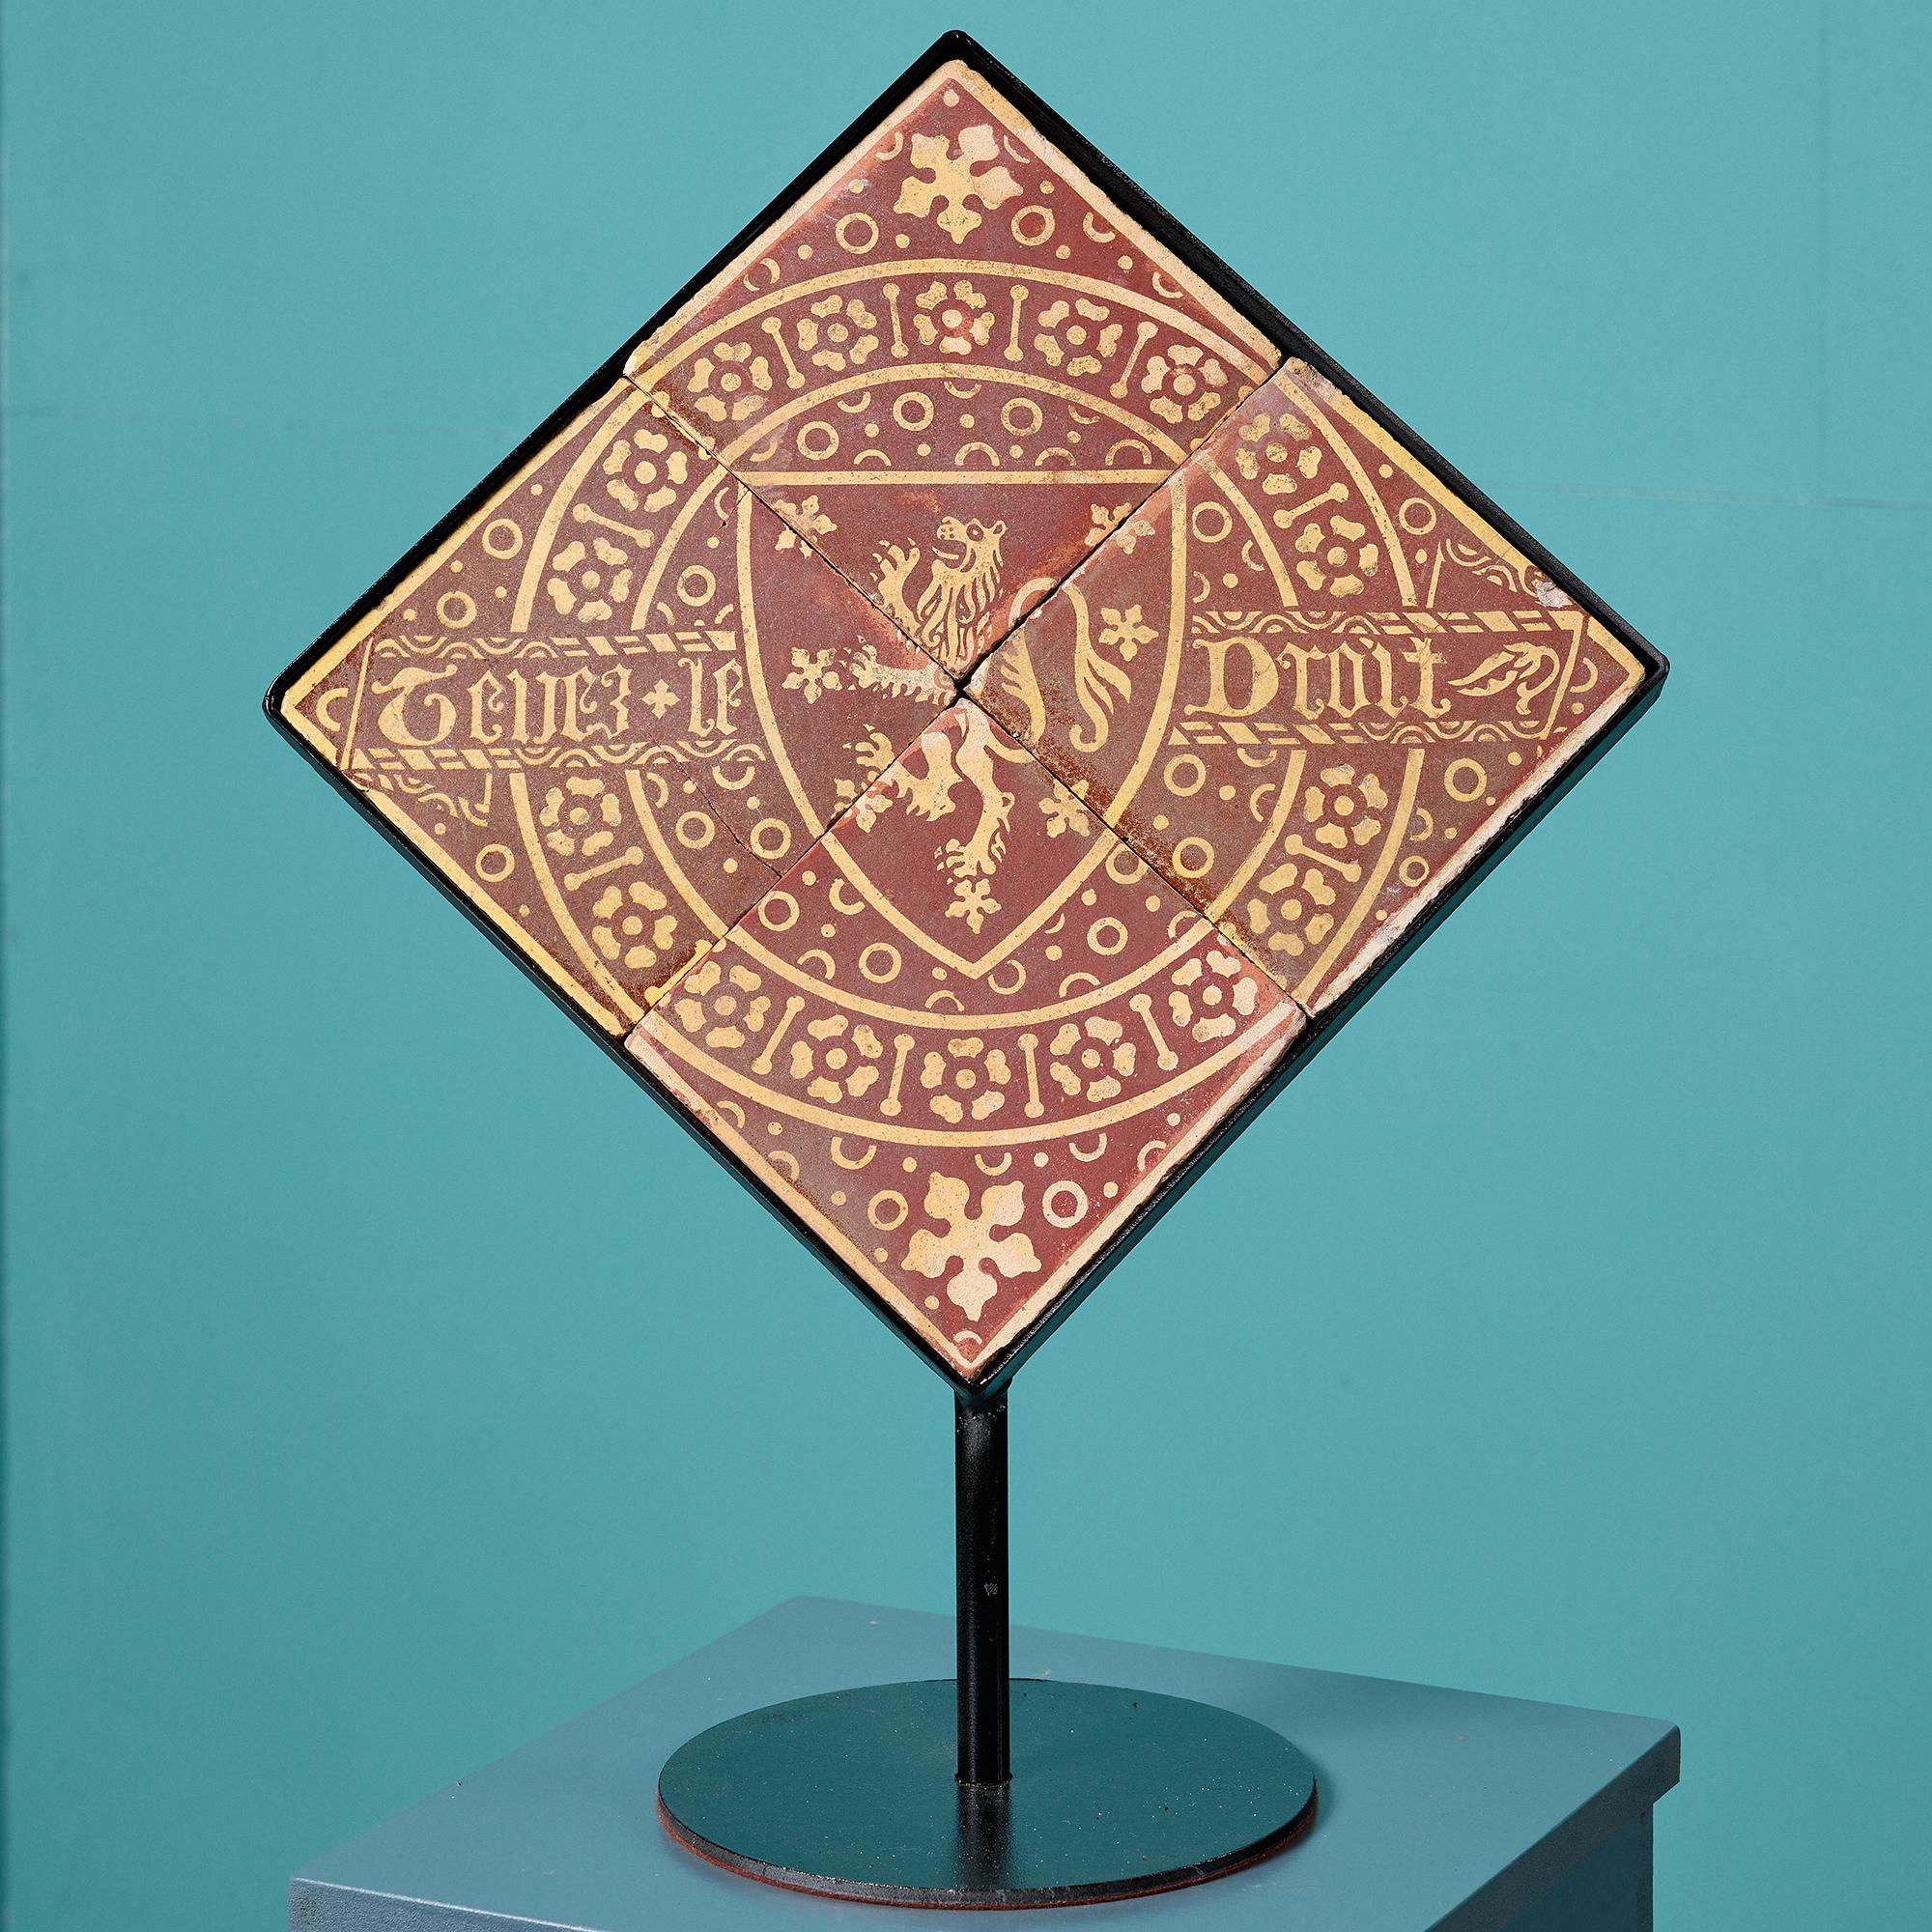 Tiles like these have decorated the floors of notable English buildings for centuries. But while many have become steadily worn and weathered away by footfall, these four armorial tiles are a rare find, having remained in beautiful condition for